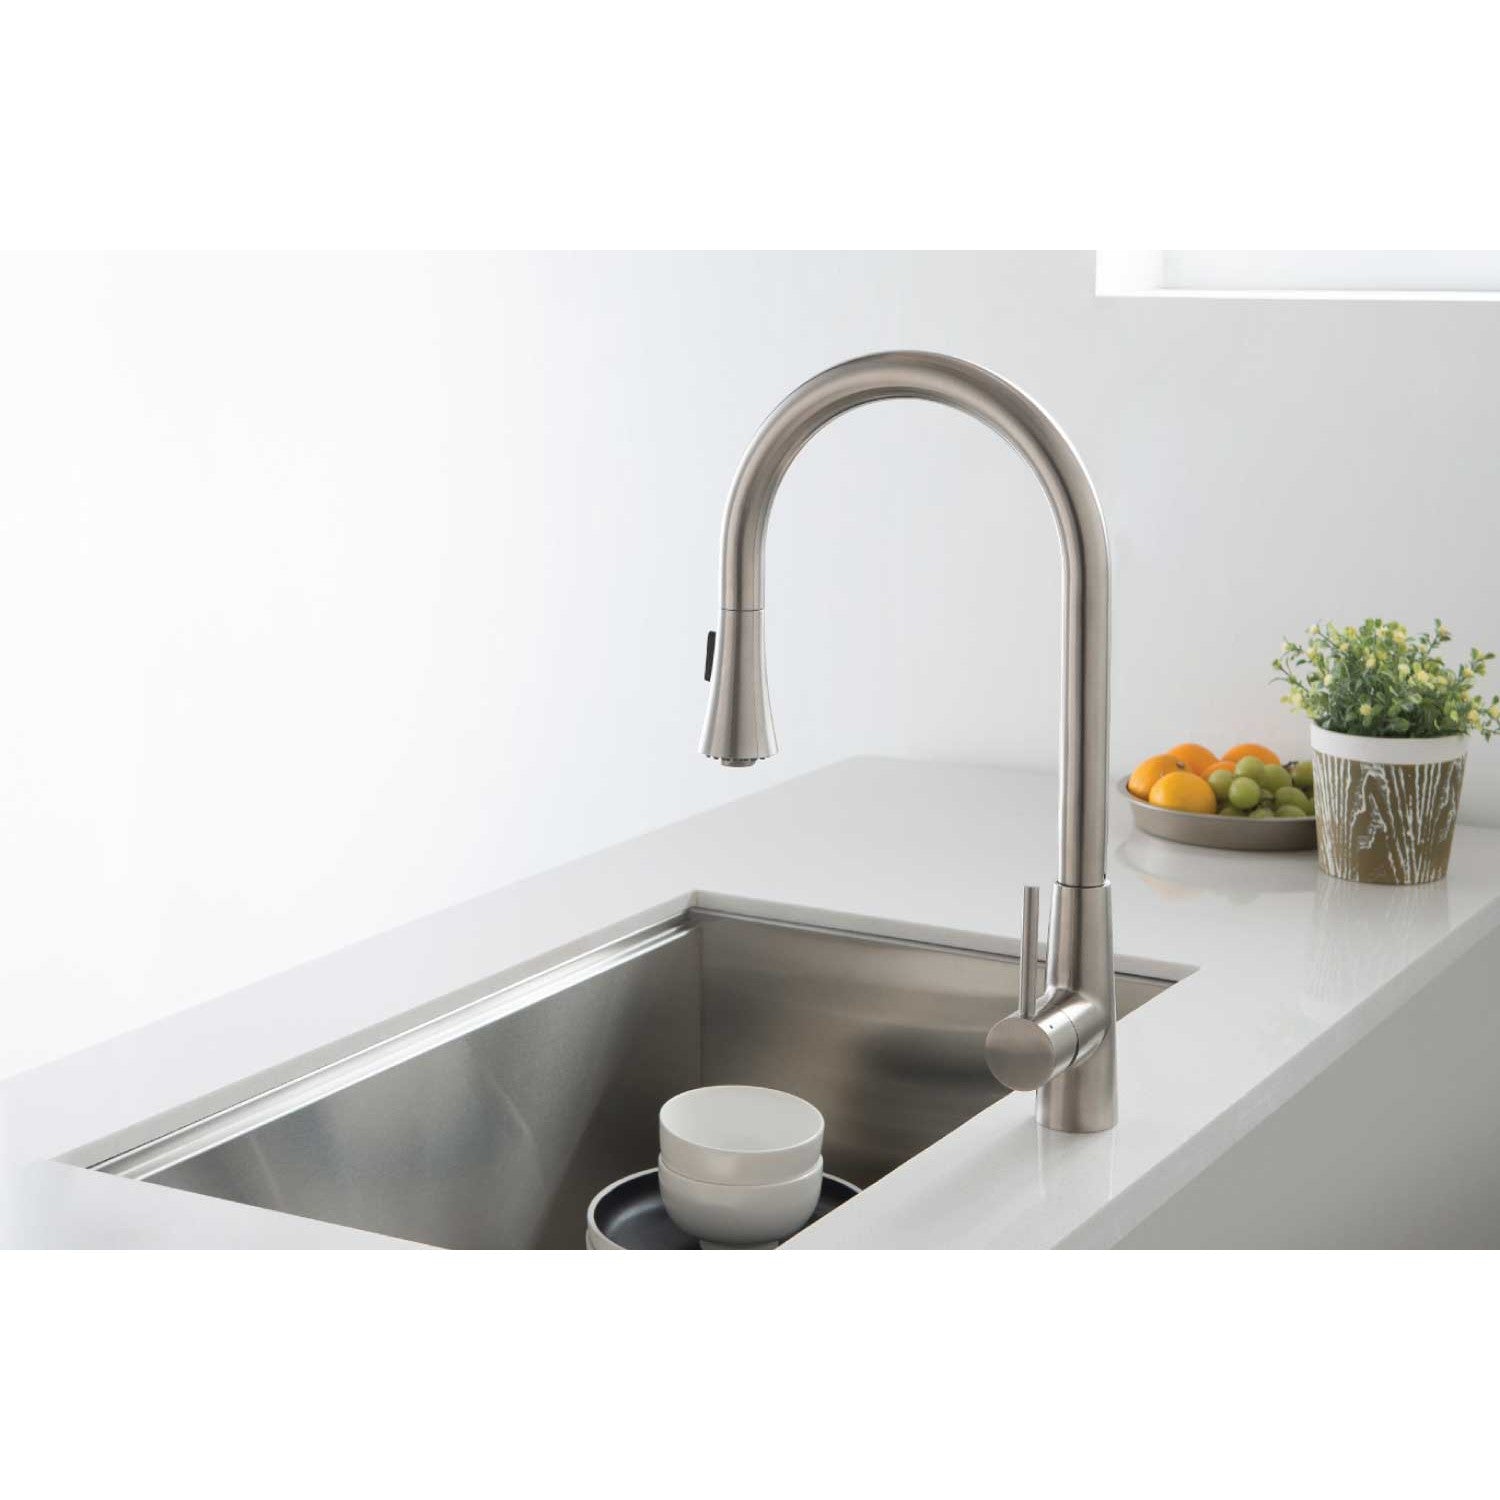 Isenberg Klassiker Zest 18" Single Hole Leaf Green Stainless Steel Pull-Down Kitchen Faucet With Dual Function Sprayer